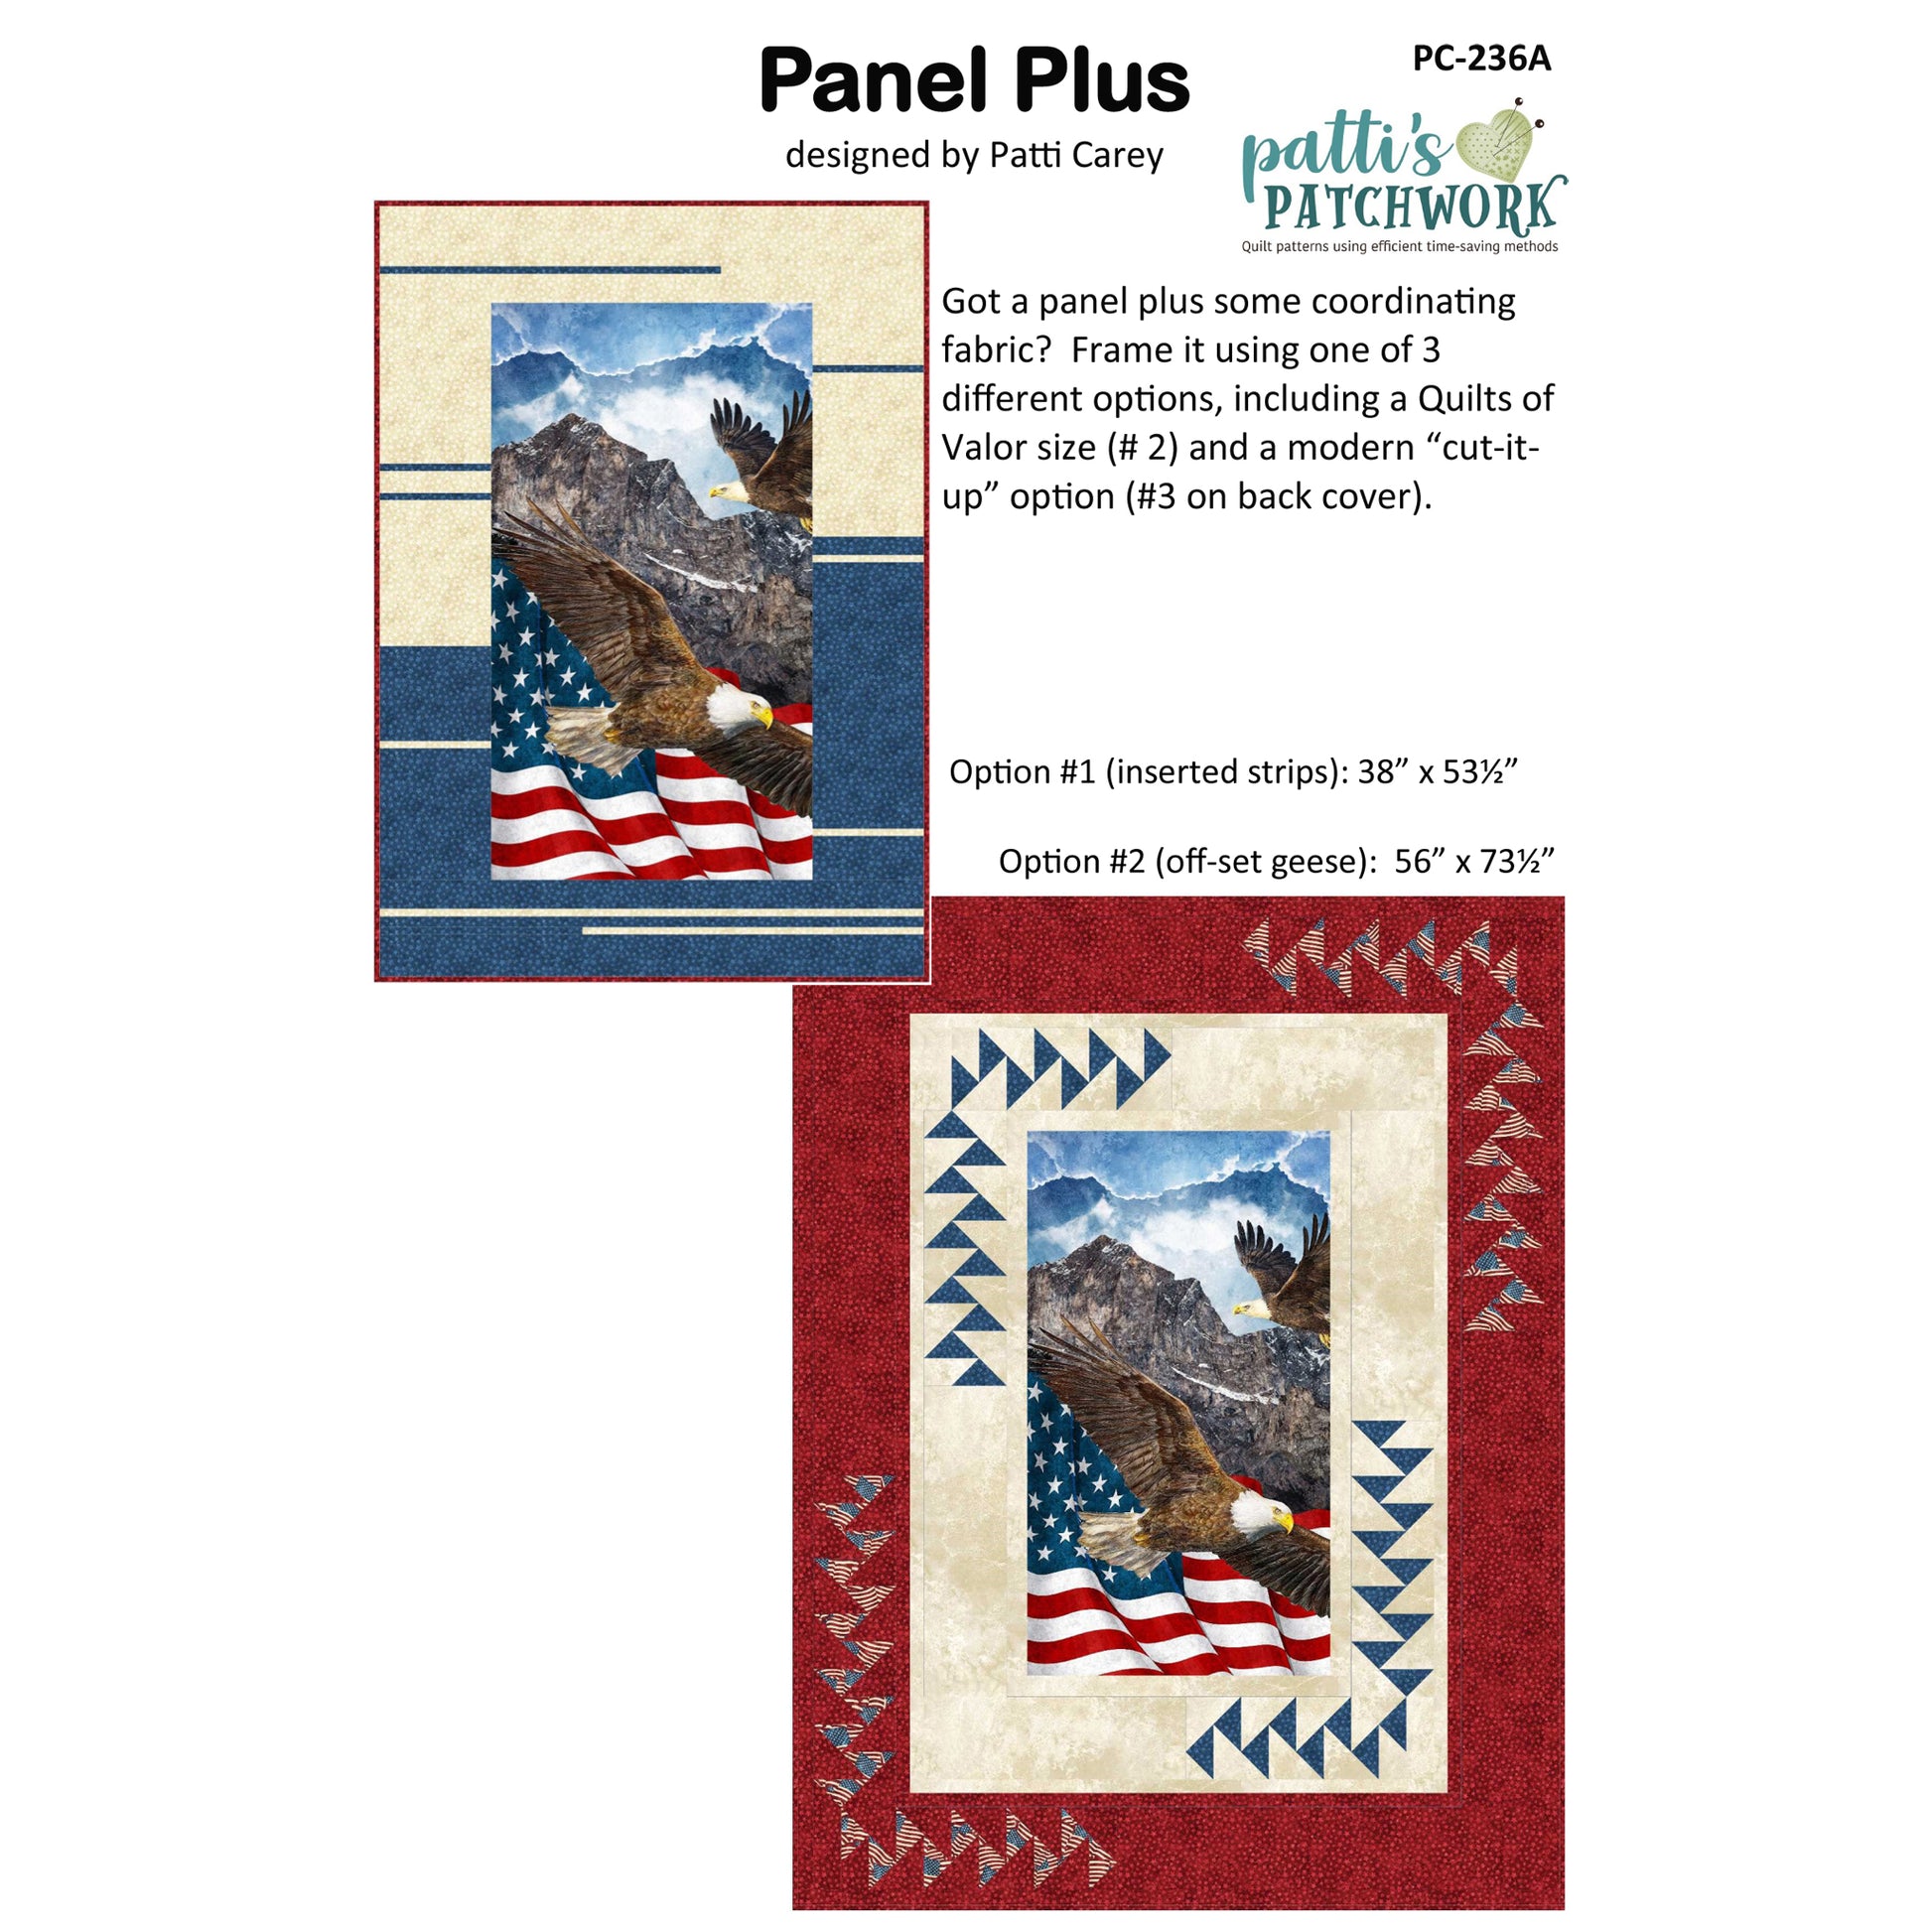 Image of cover of pattern for Panel Plus Quilts.